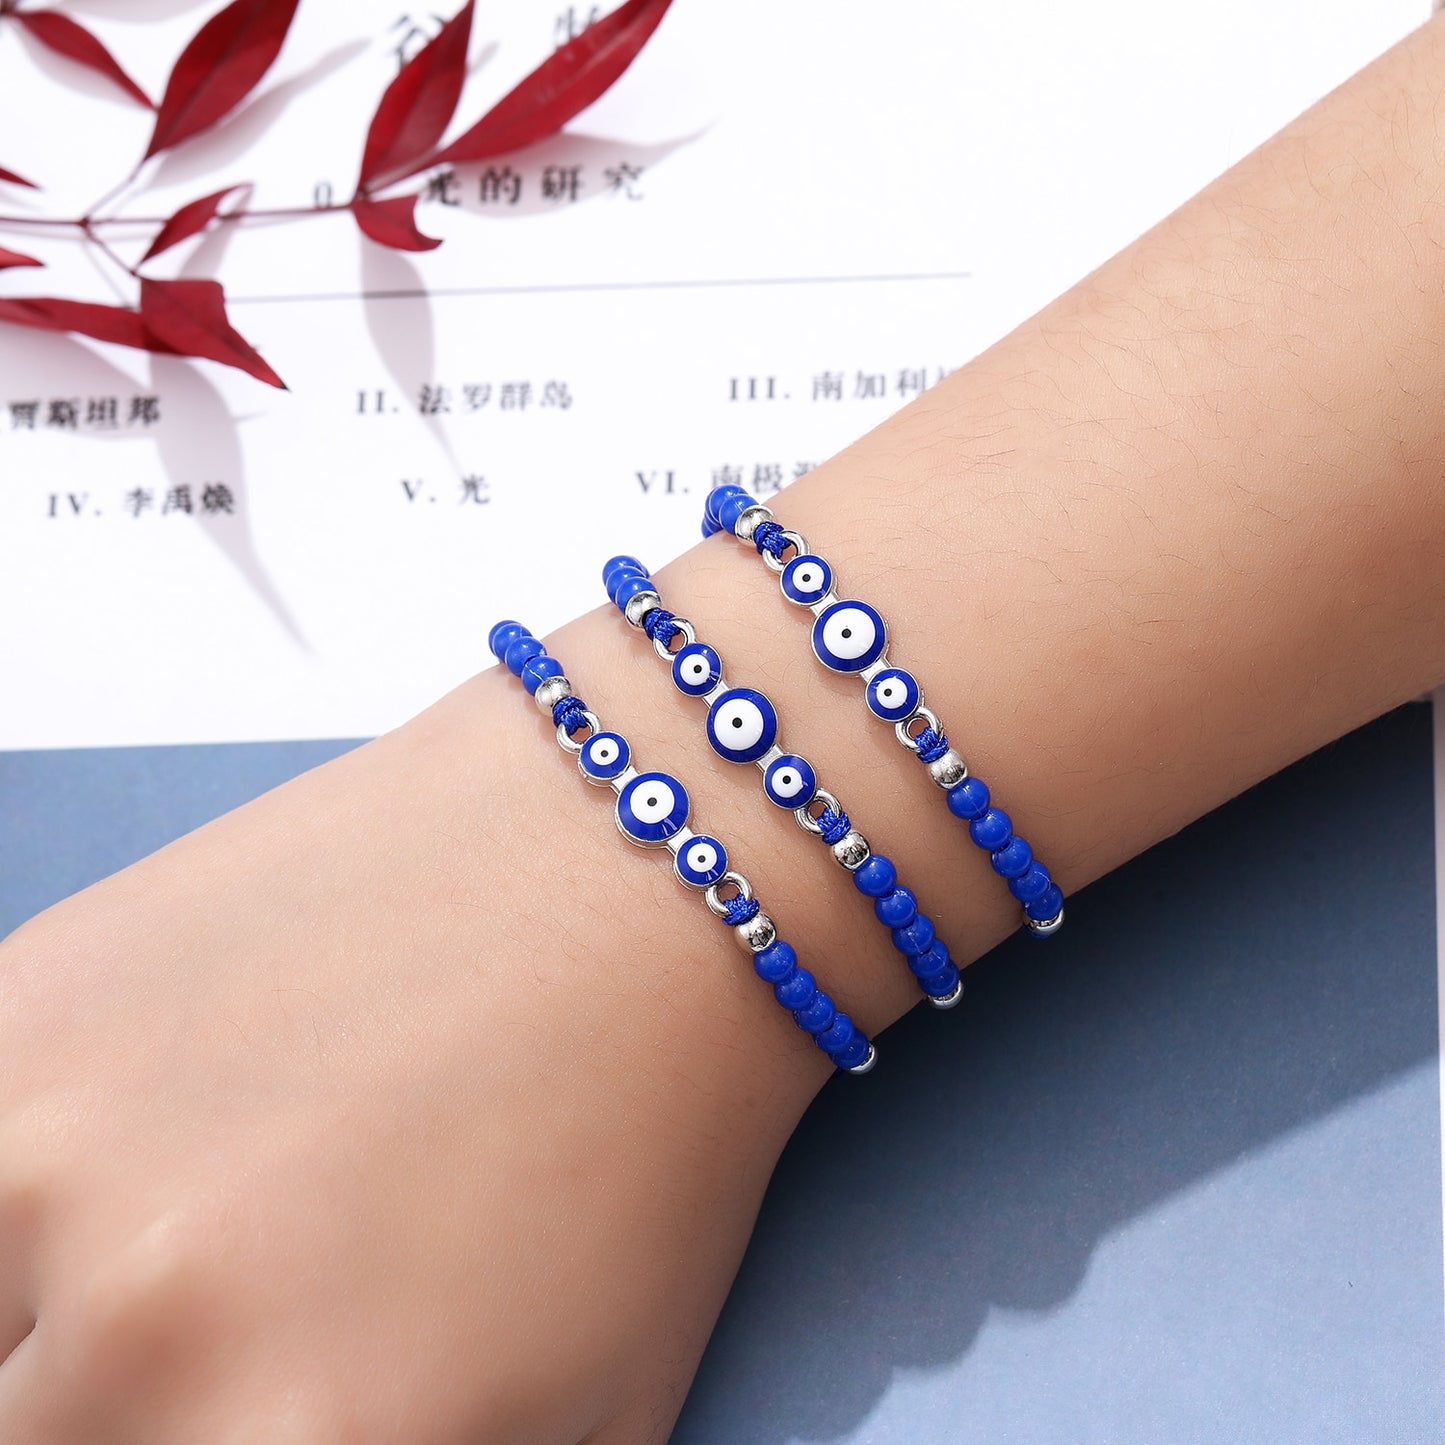 12 Pieces Evil Eye Charms Bracelet for Women Men Adjustable Hand Braided Rope Anklet Surf Jewelry Wholesale